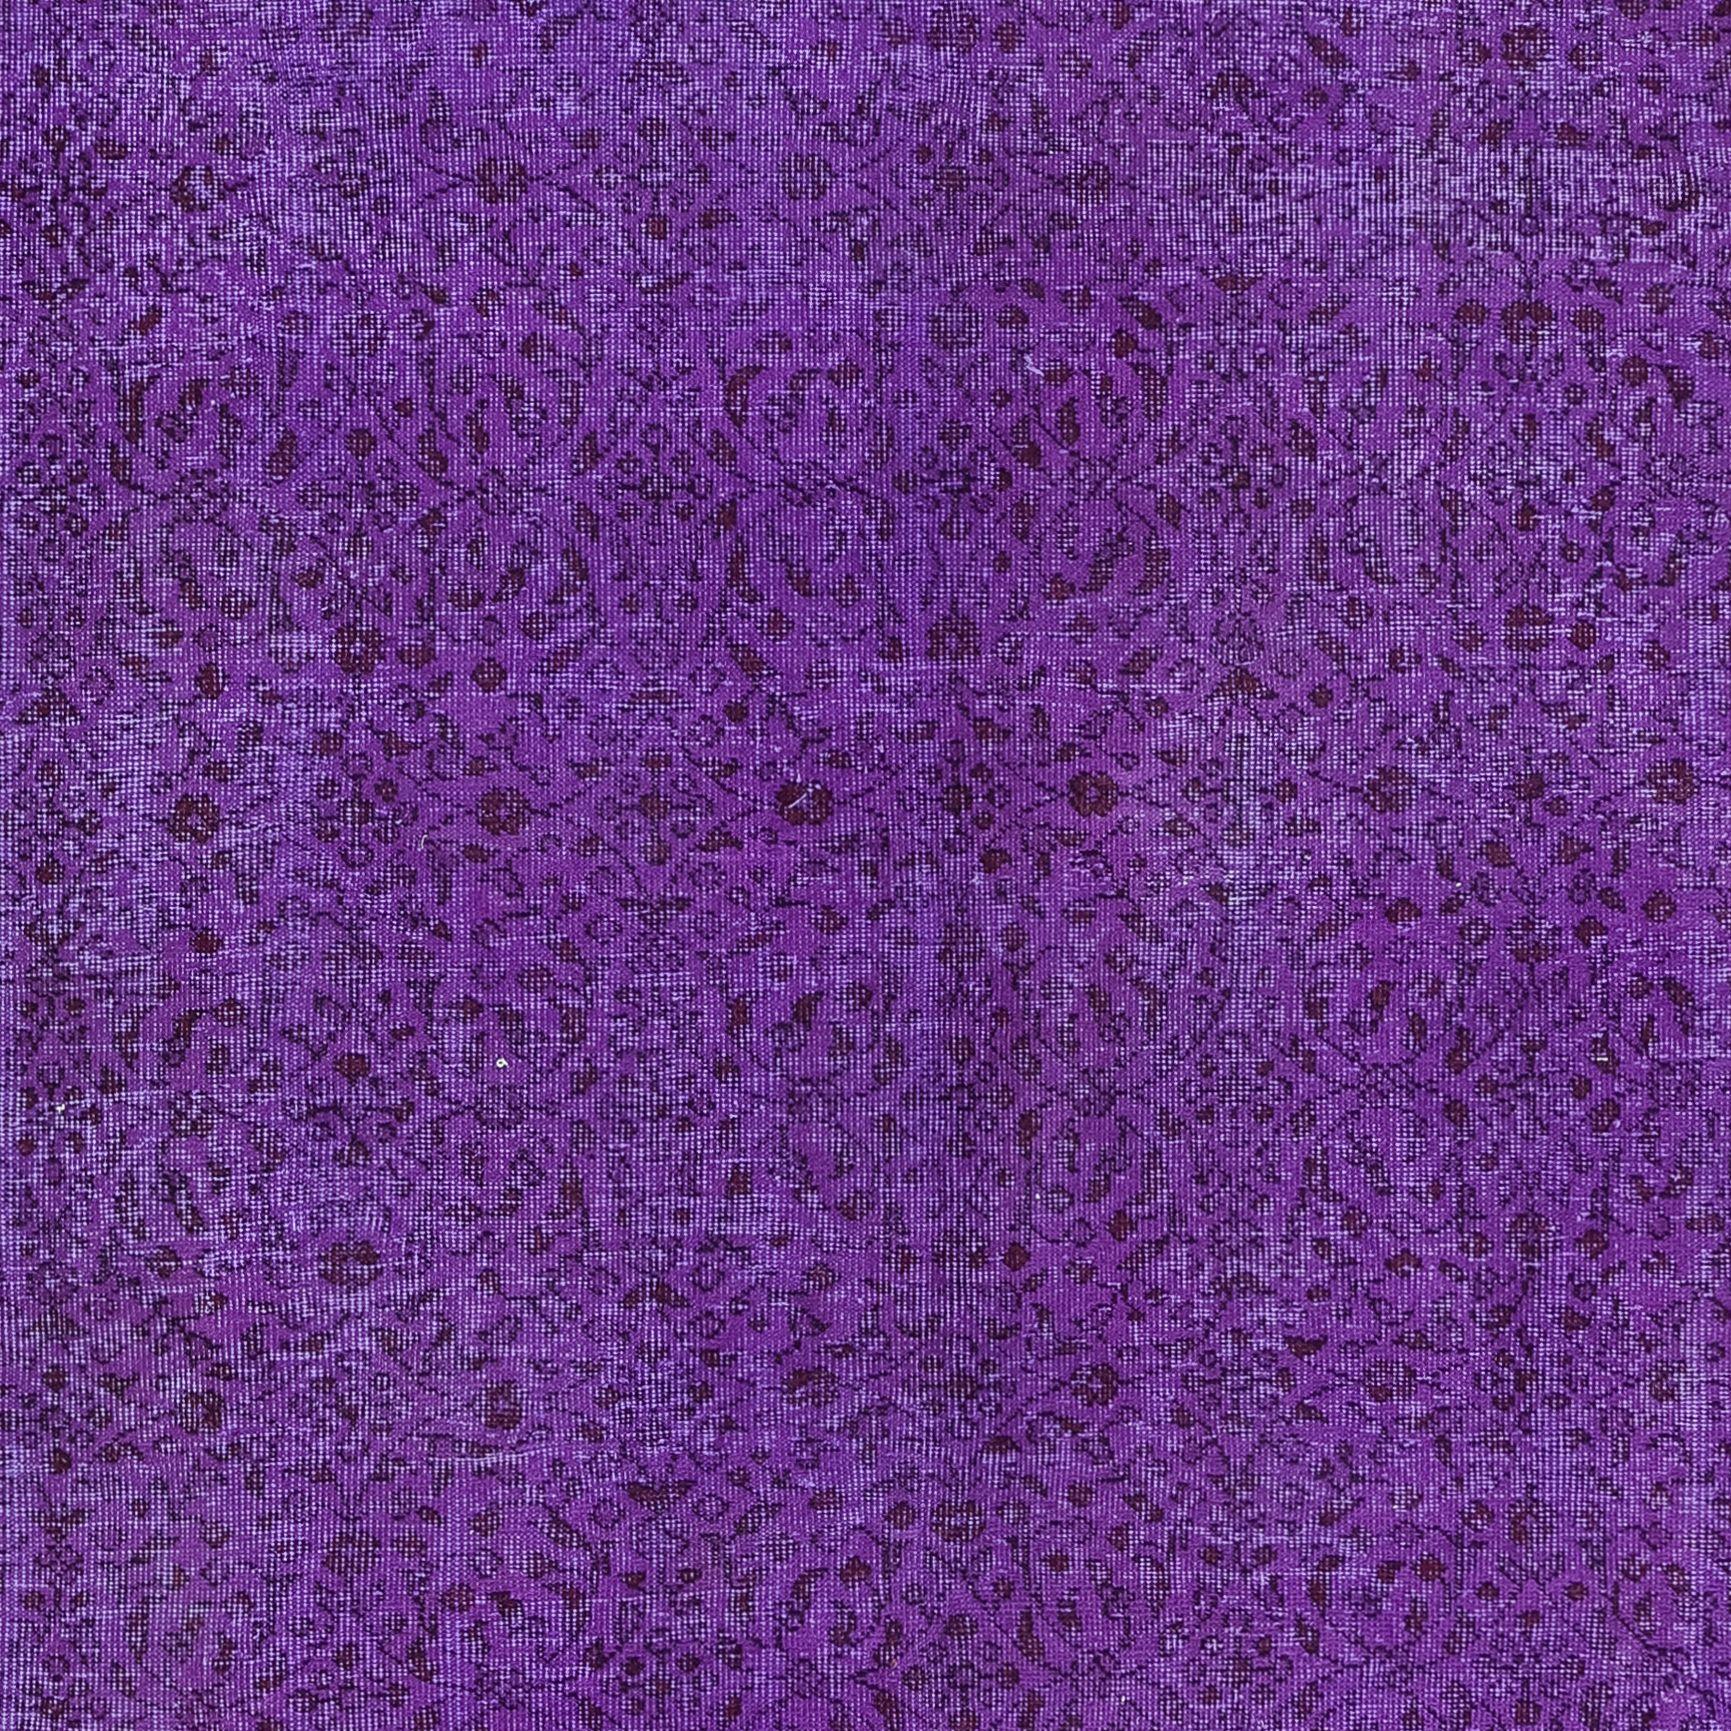 Turkish 6.5x9.5 Ft Modern Floral Patterned Area Rug in Purple, Hand-Knotted in Turkey For Sale